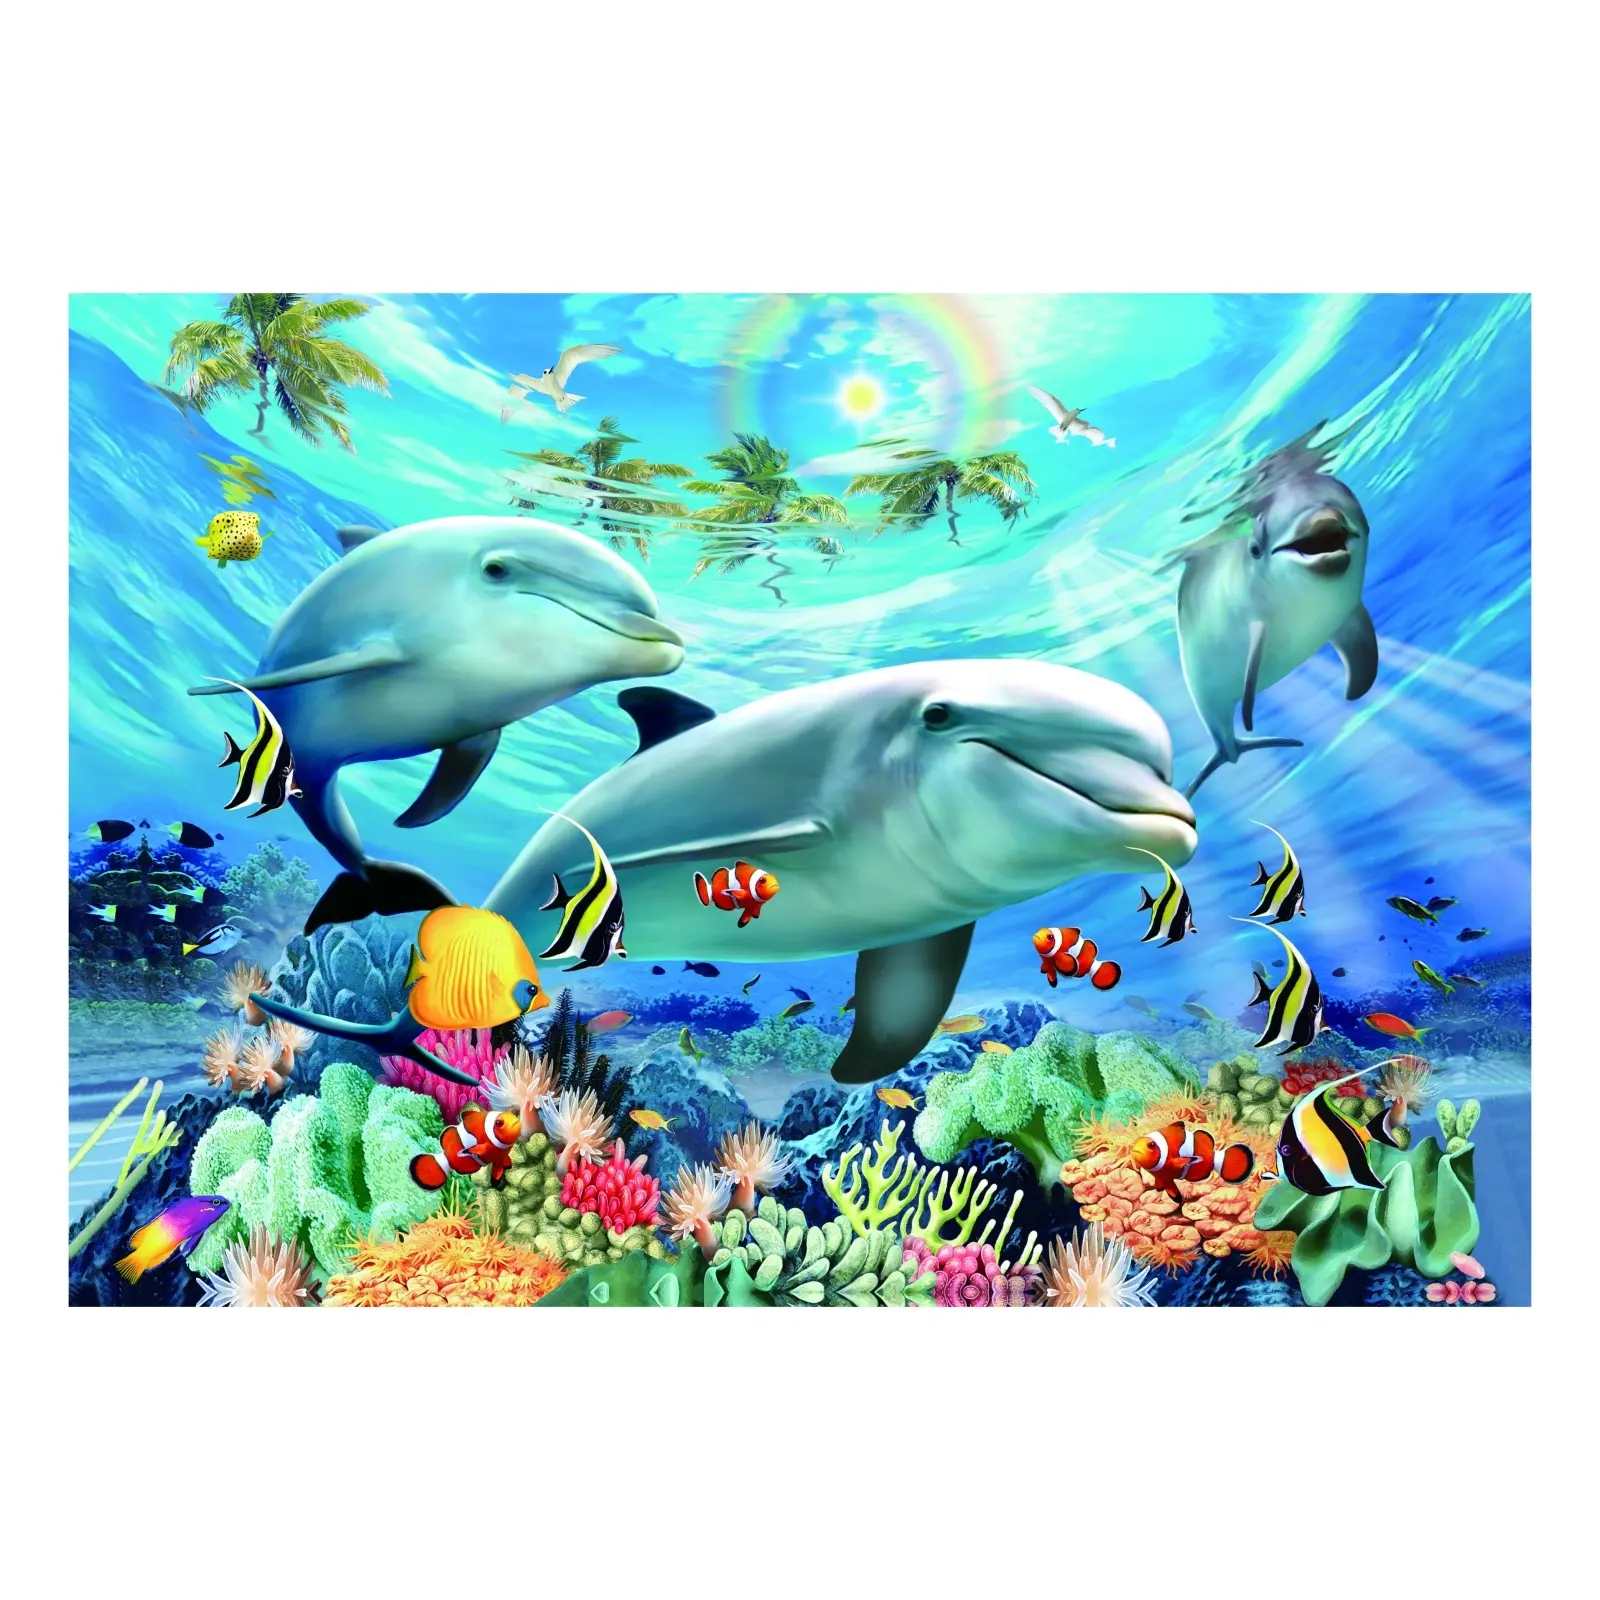 Hot sell sample free lenticular PET 0.9mm 3D changing picture poster 3D lenticular picture of dolphin sea animal image